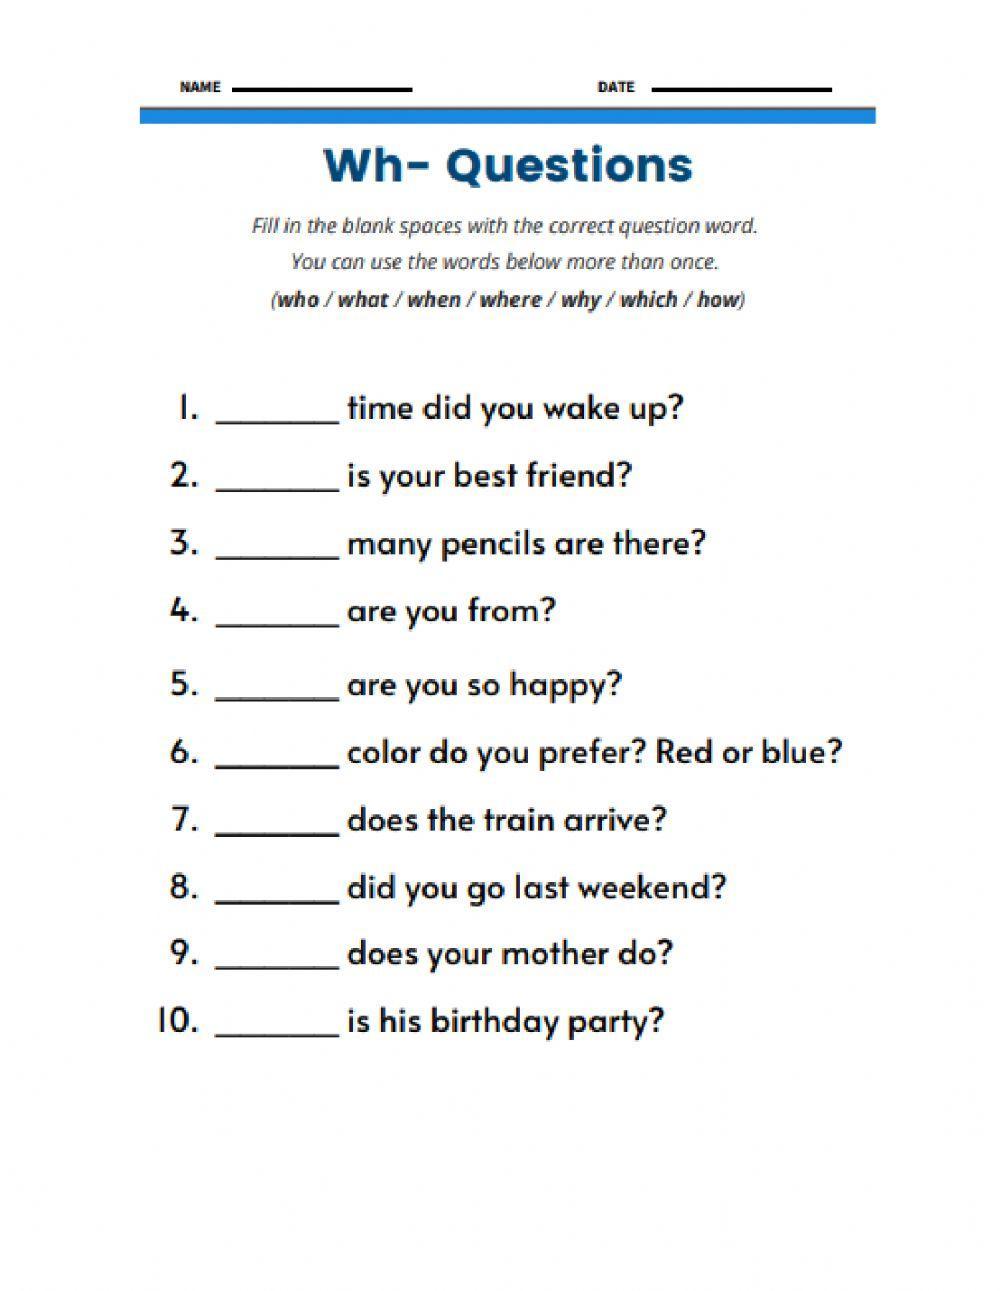 Wh-questions-